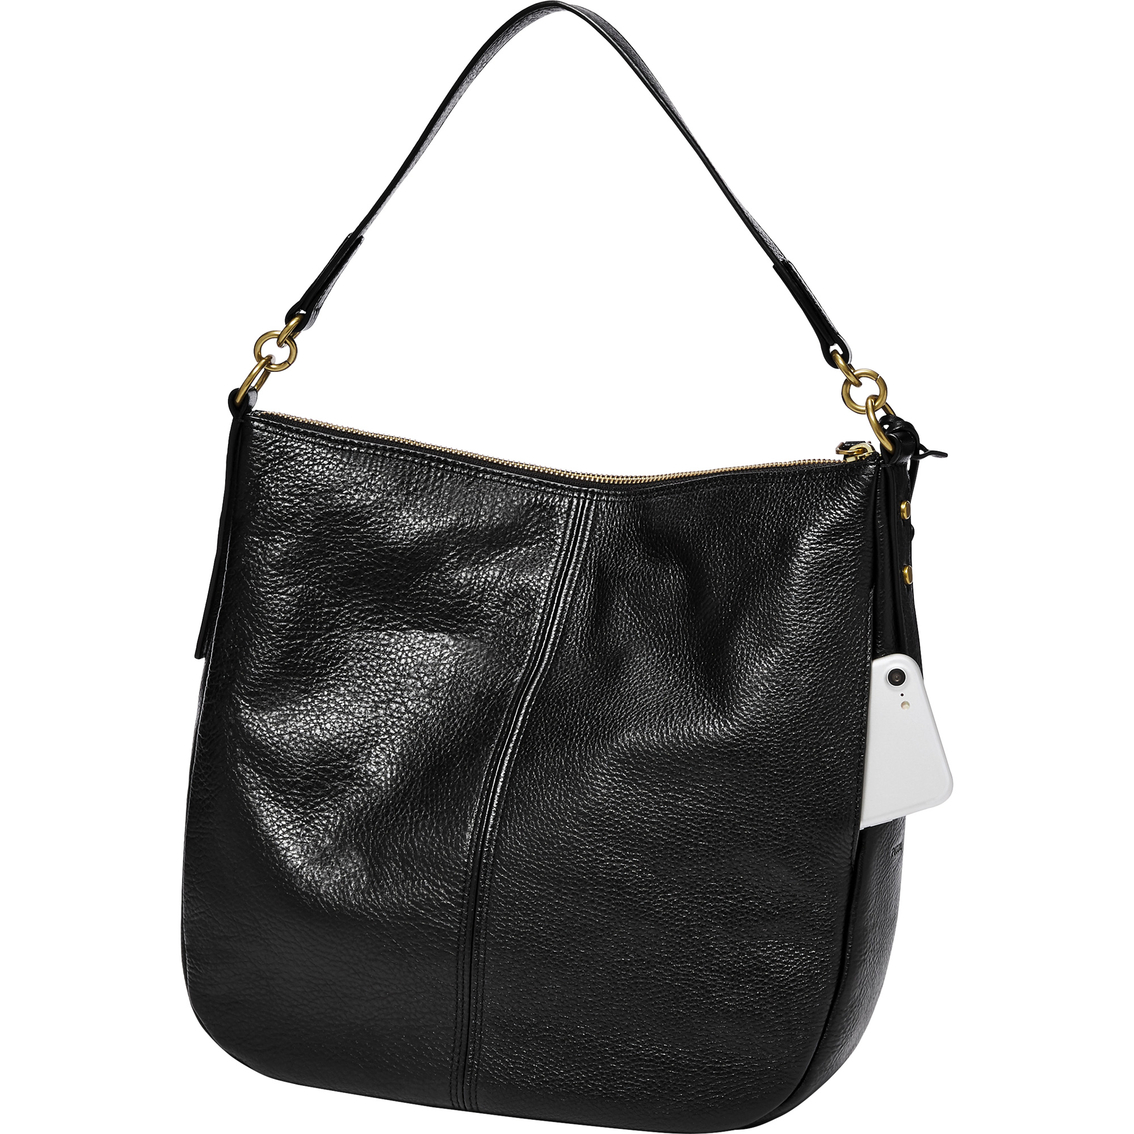 Fossil Jolie Leather Hobo Bag - Image 4 of 4